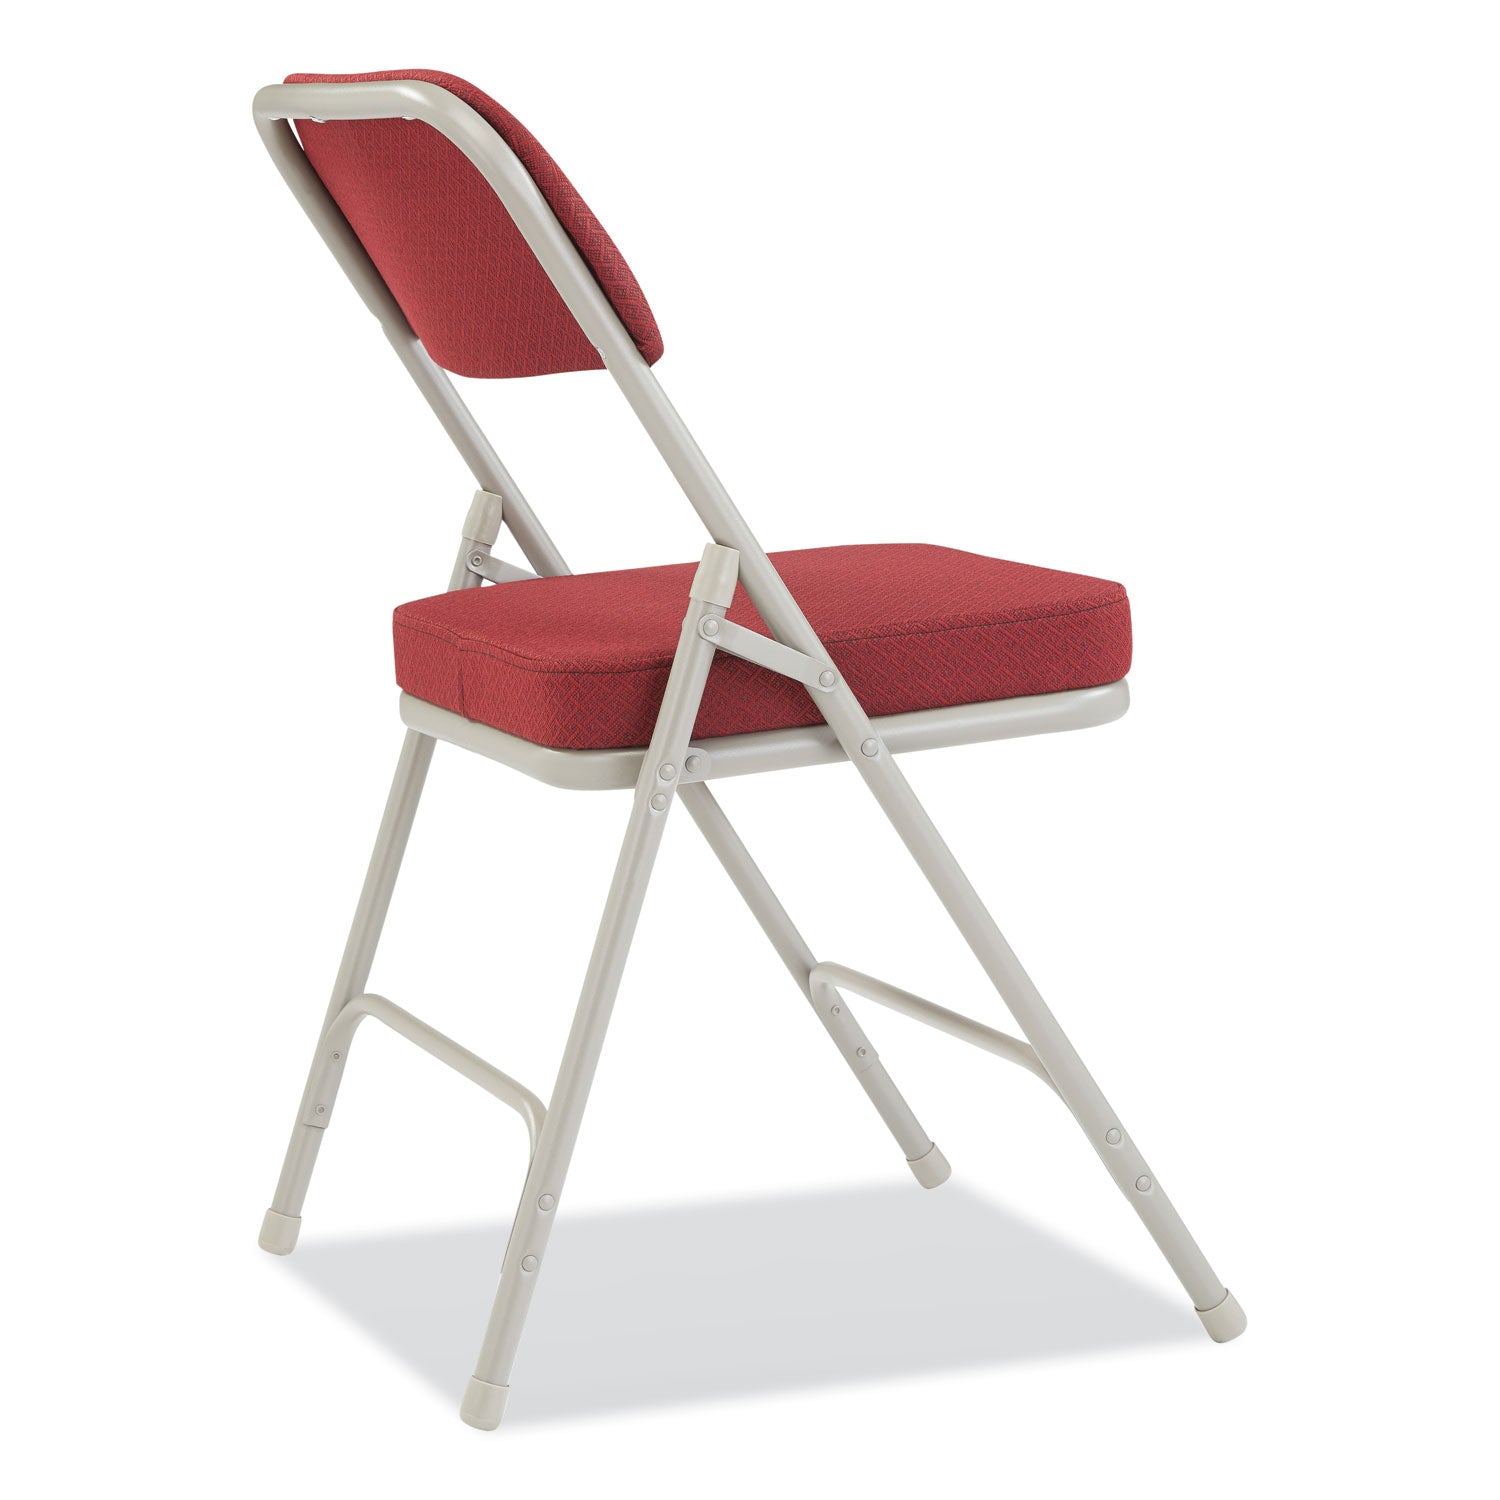 3200-series-premium-fabric-dual-hinge-folding-chair-supports-300lb-burgundy-seat-back-gray-base2-ctships-in-1-3-bus-days_nps3218 - 4